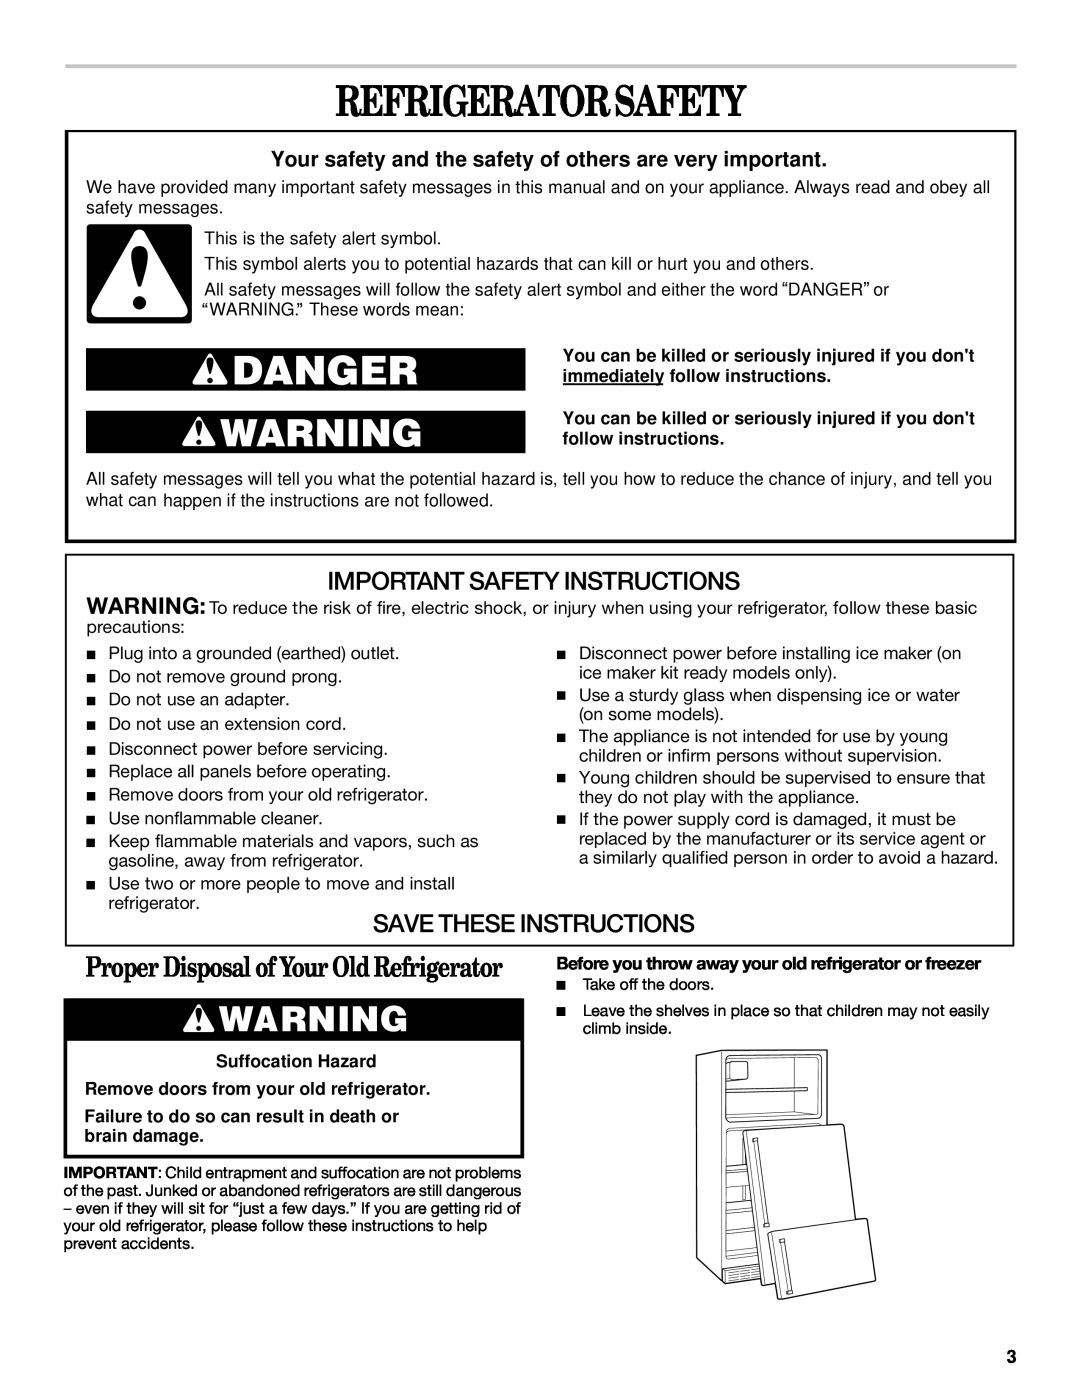 Whirlpool 2218585 Refrigeratorsafety, Your safety and the safety of others are very important, Save These Instructions 